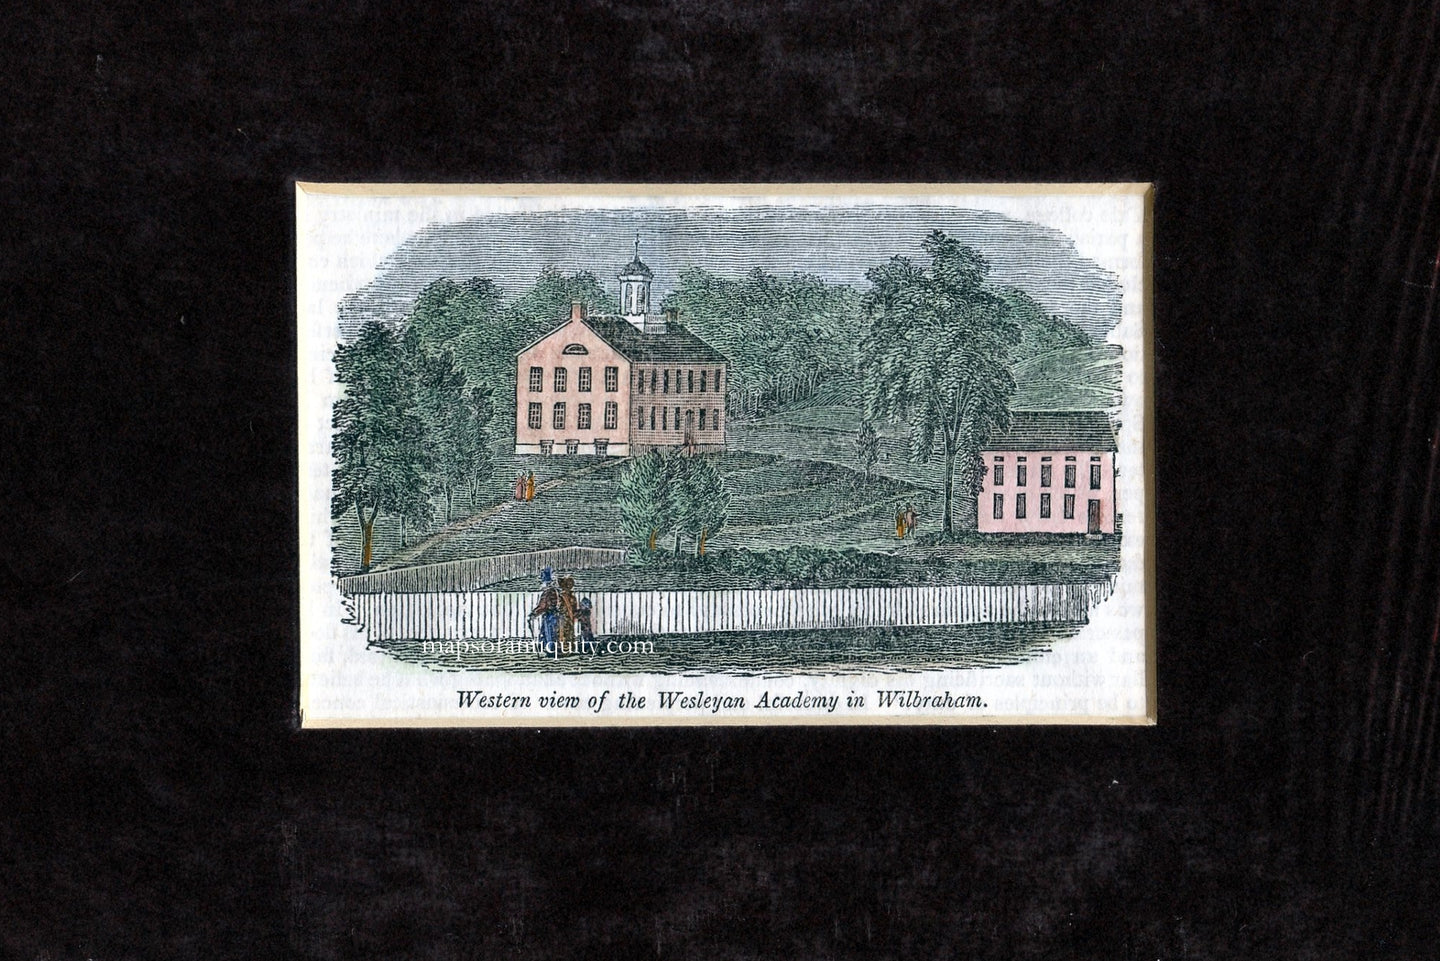 Hand-painted-engraving-Western-view-of-the-Wesleyan-Academy-in-Wilbraham-(Wilbraham-Academy)-**********-US-Massachusetts-Massachusetts-General-1839-Barber-Maps-Of-Antiquity